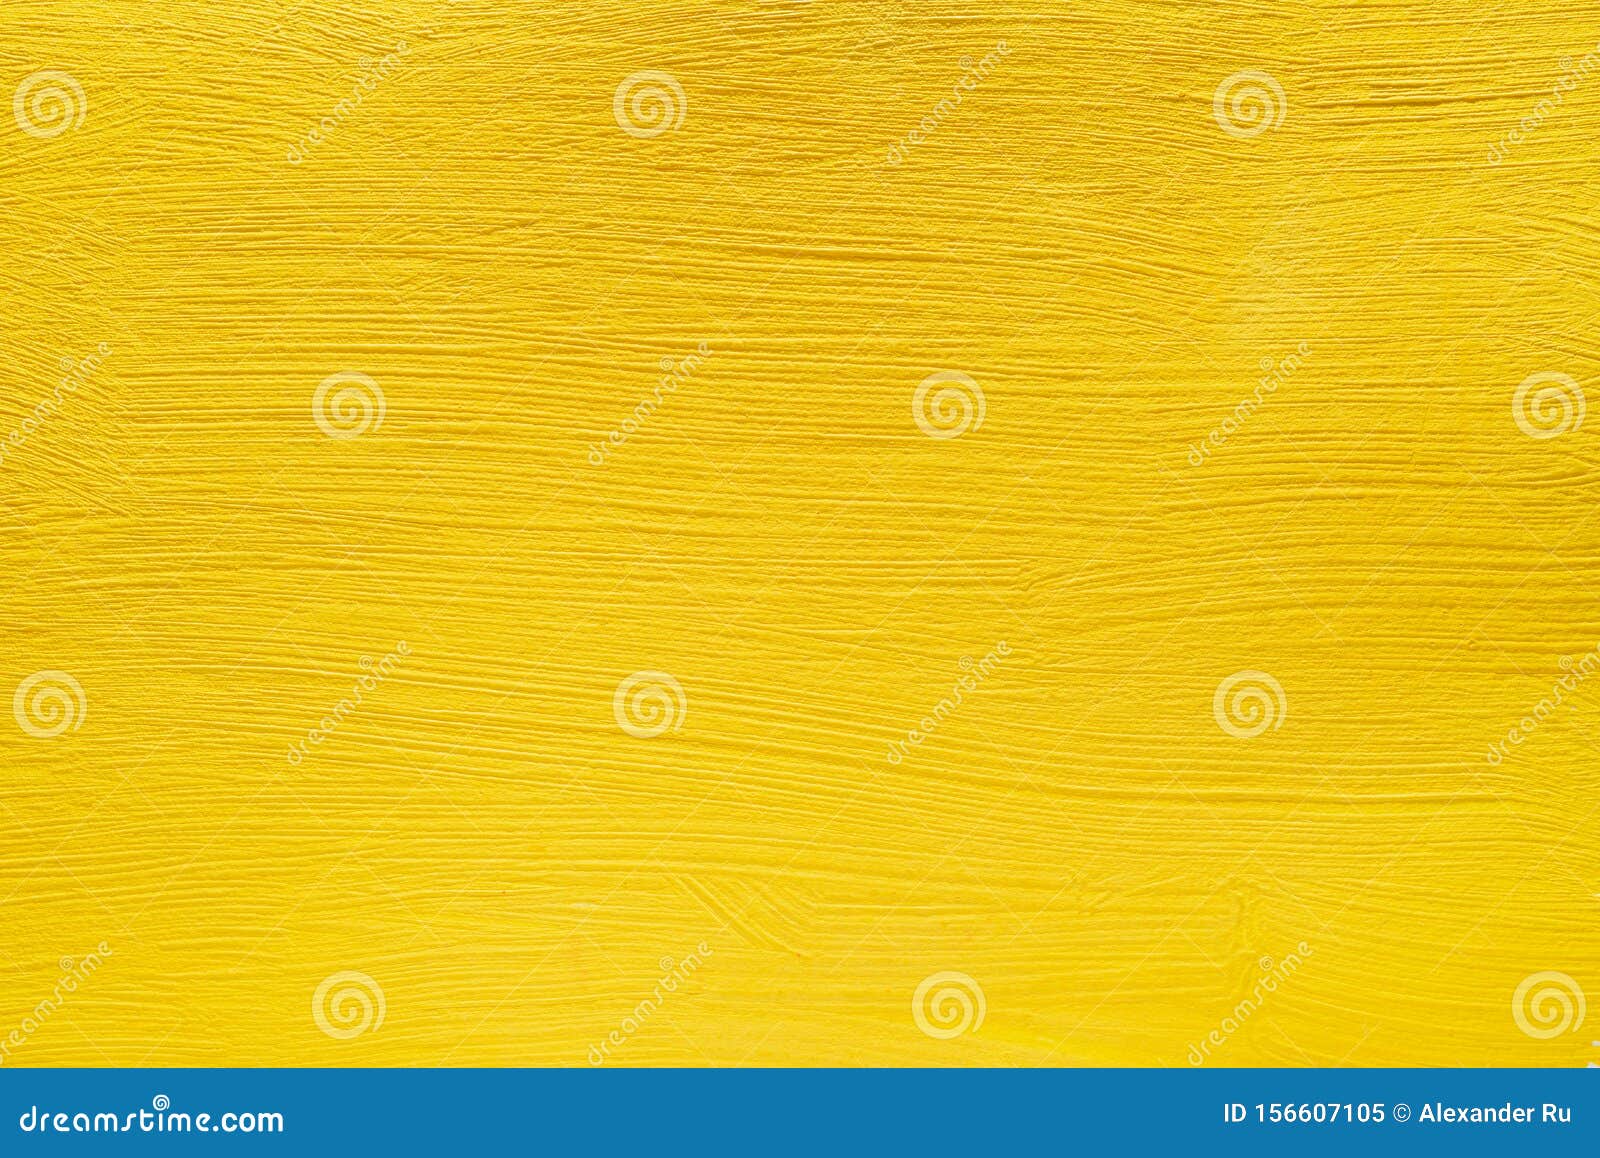 Abstract Yellow Background from Acrylic Paints. Concrete Background ...